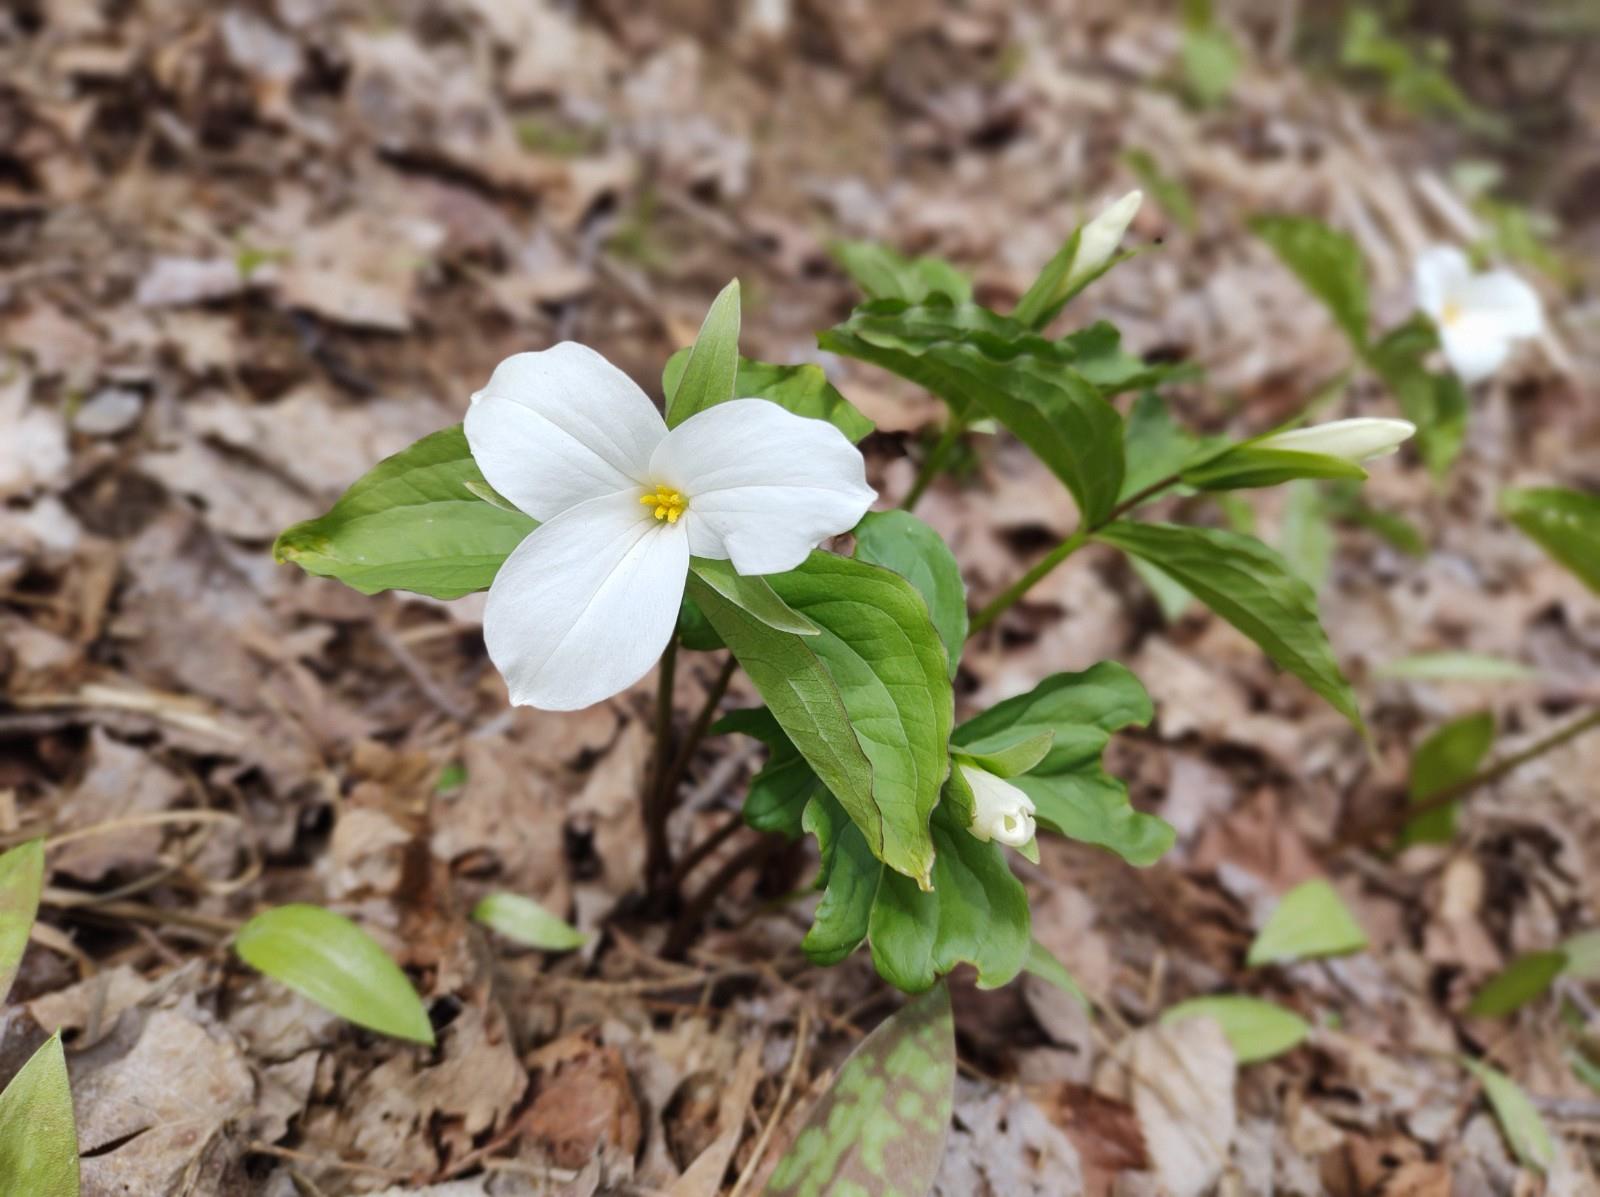 A white trillium blooming on an Ontario forest floor.